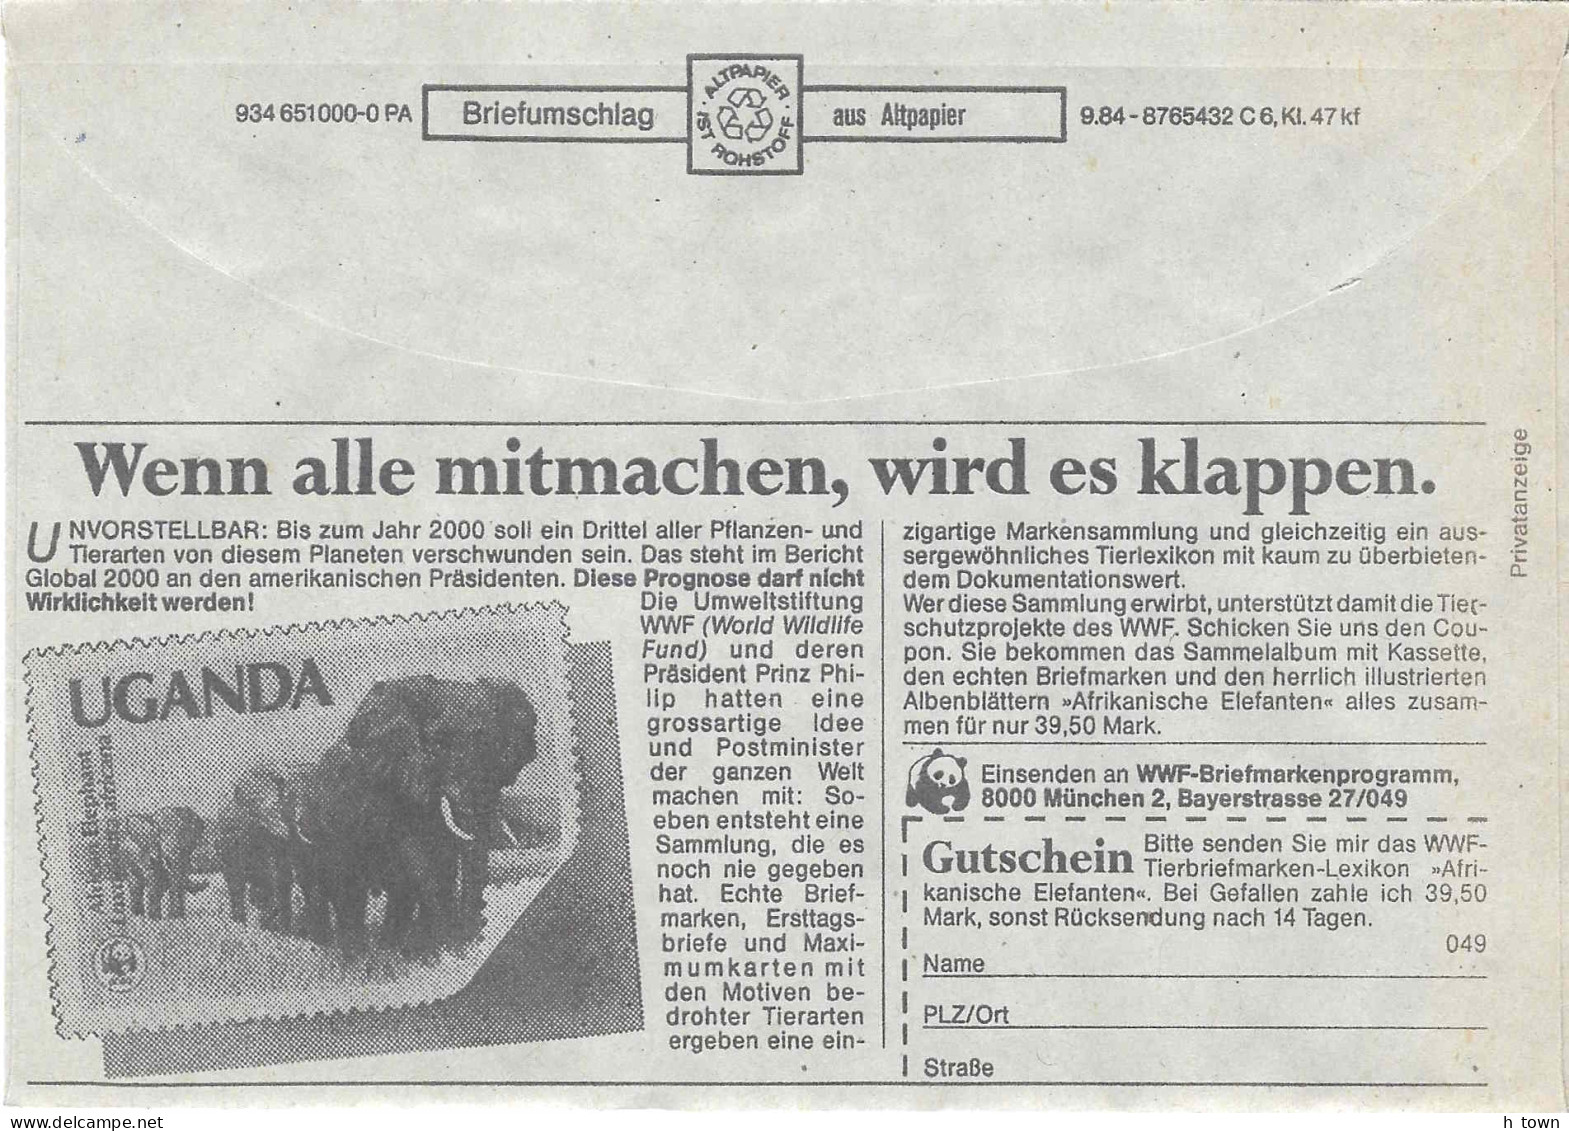 324  Elephant, Timbre, WWF: Env. Port Payée D'Allemagne - Stamp, WWF-Advertising On PP Cover From Germany  - Olifanten